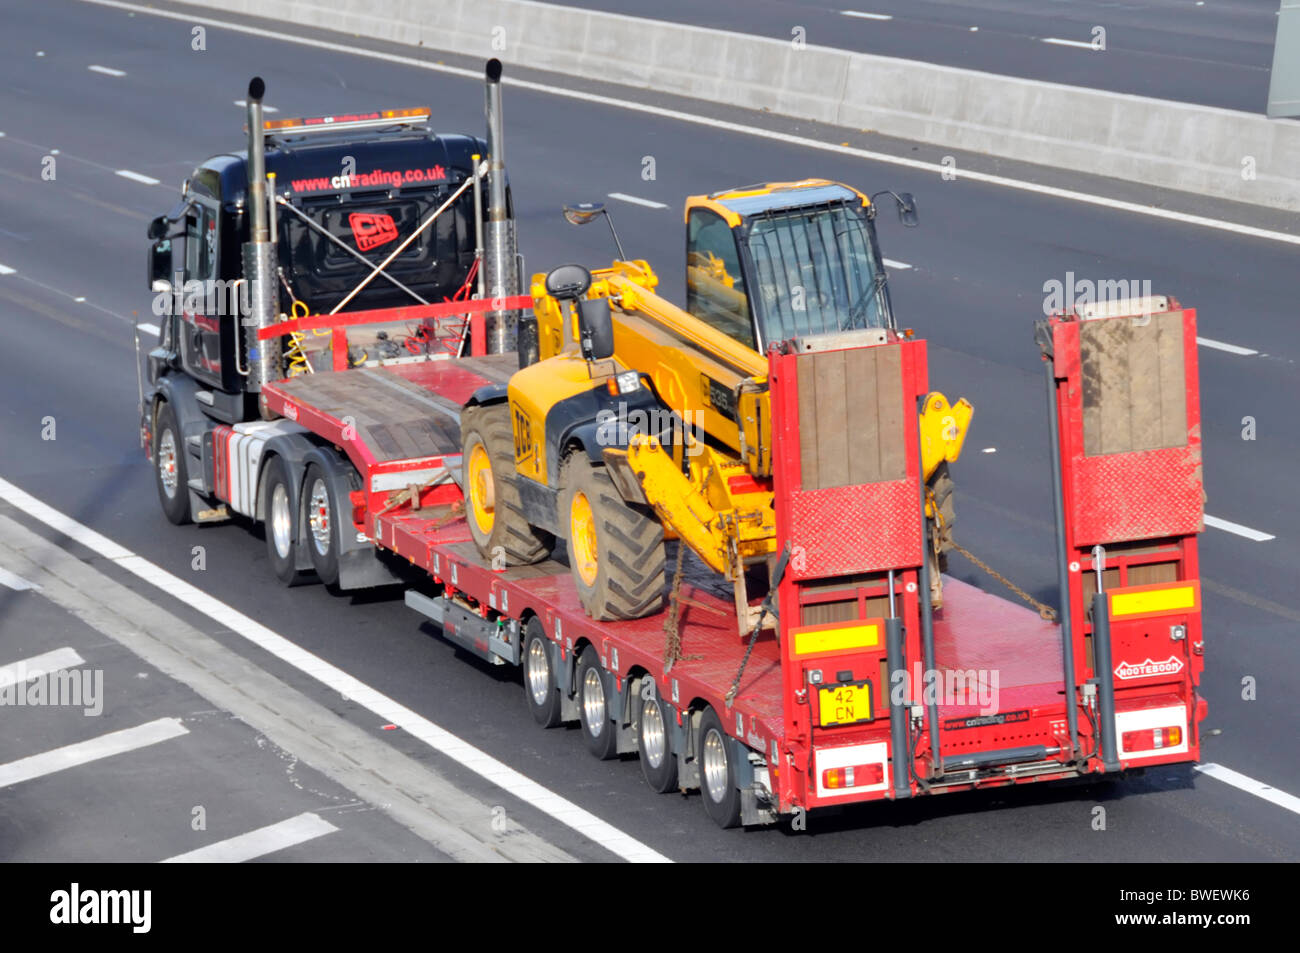 HGV lorry truck & low loader transport for JCB Bamford business diesel hydraulic construction equipment machine driving on motorway England UK Stock Photo